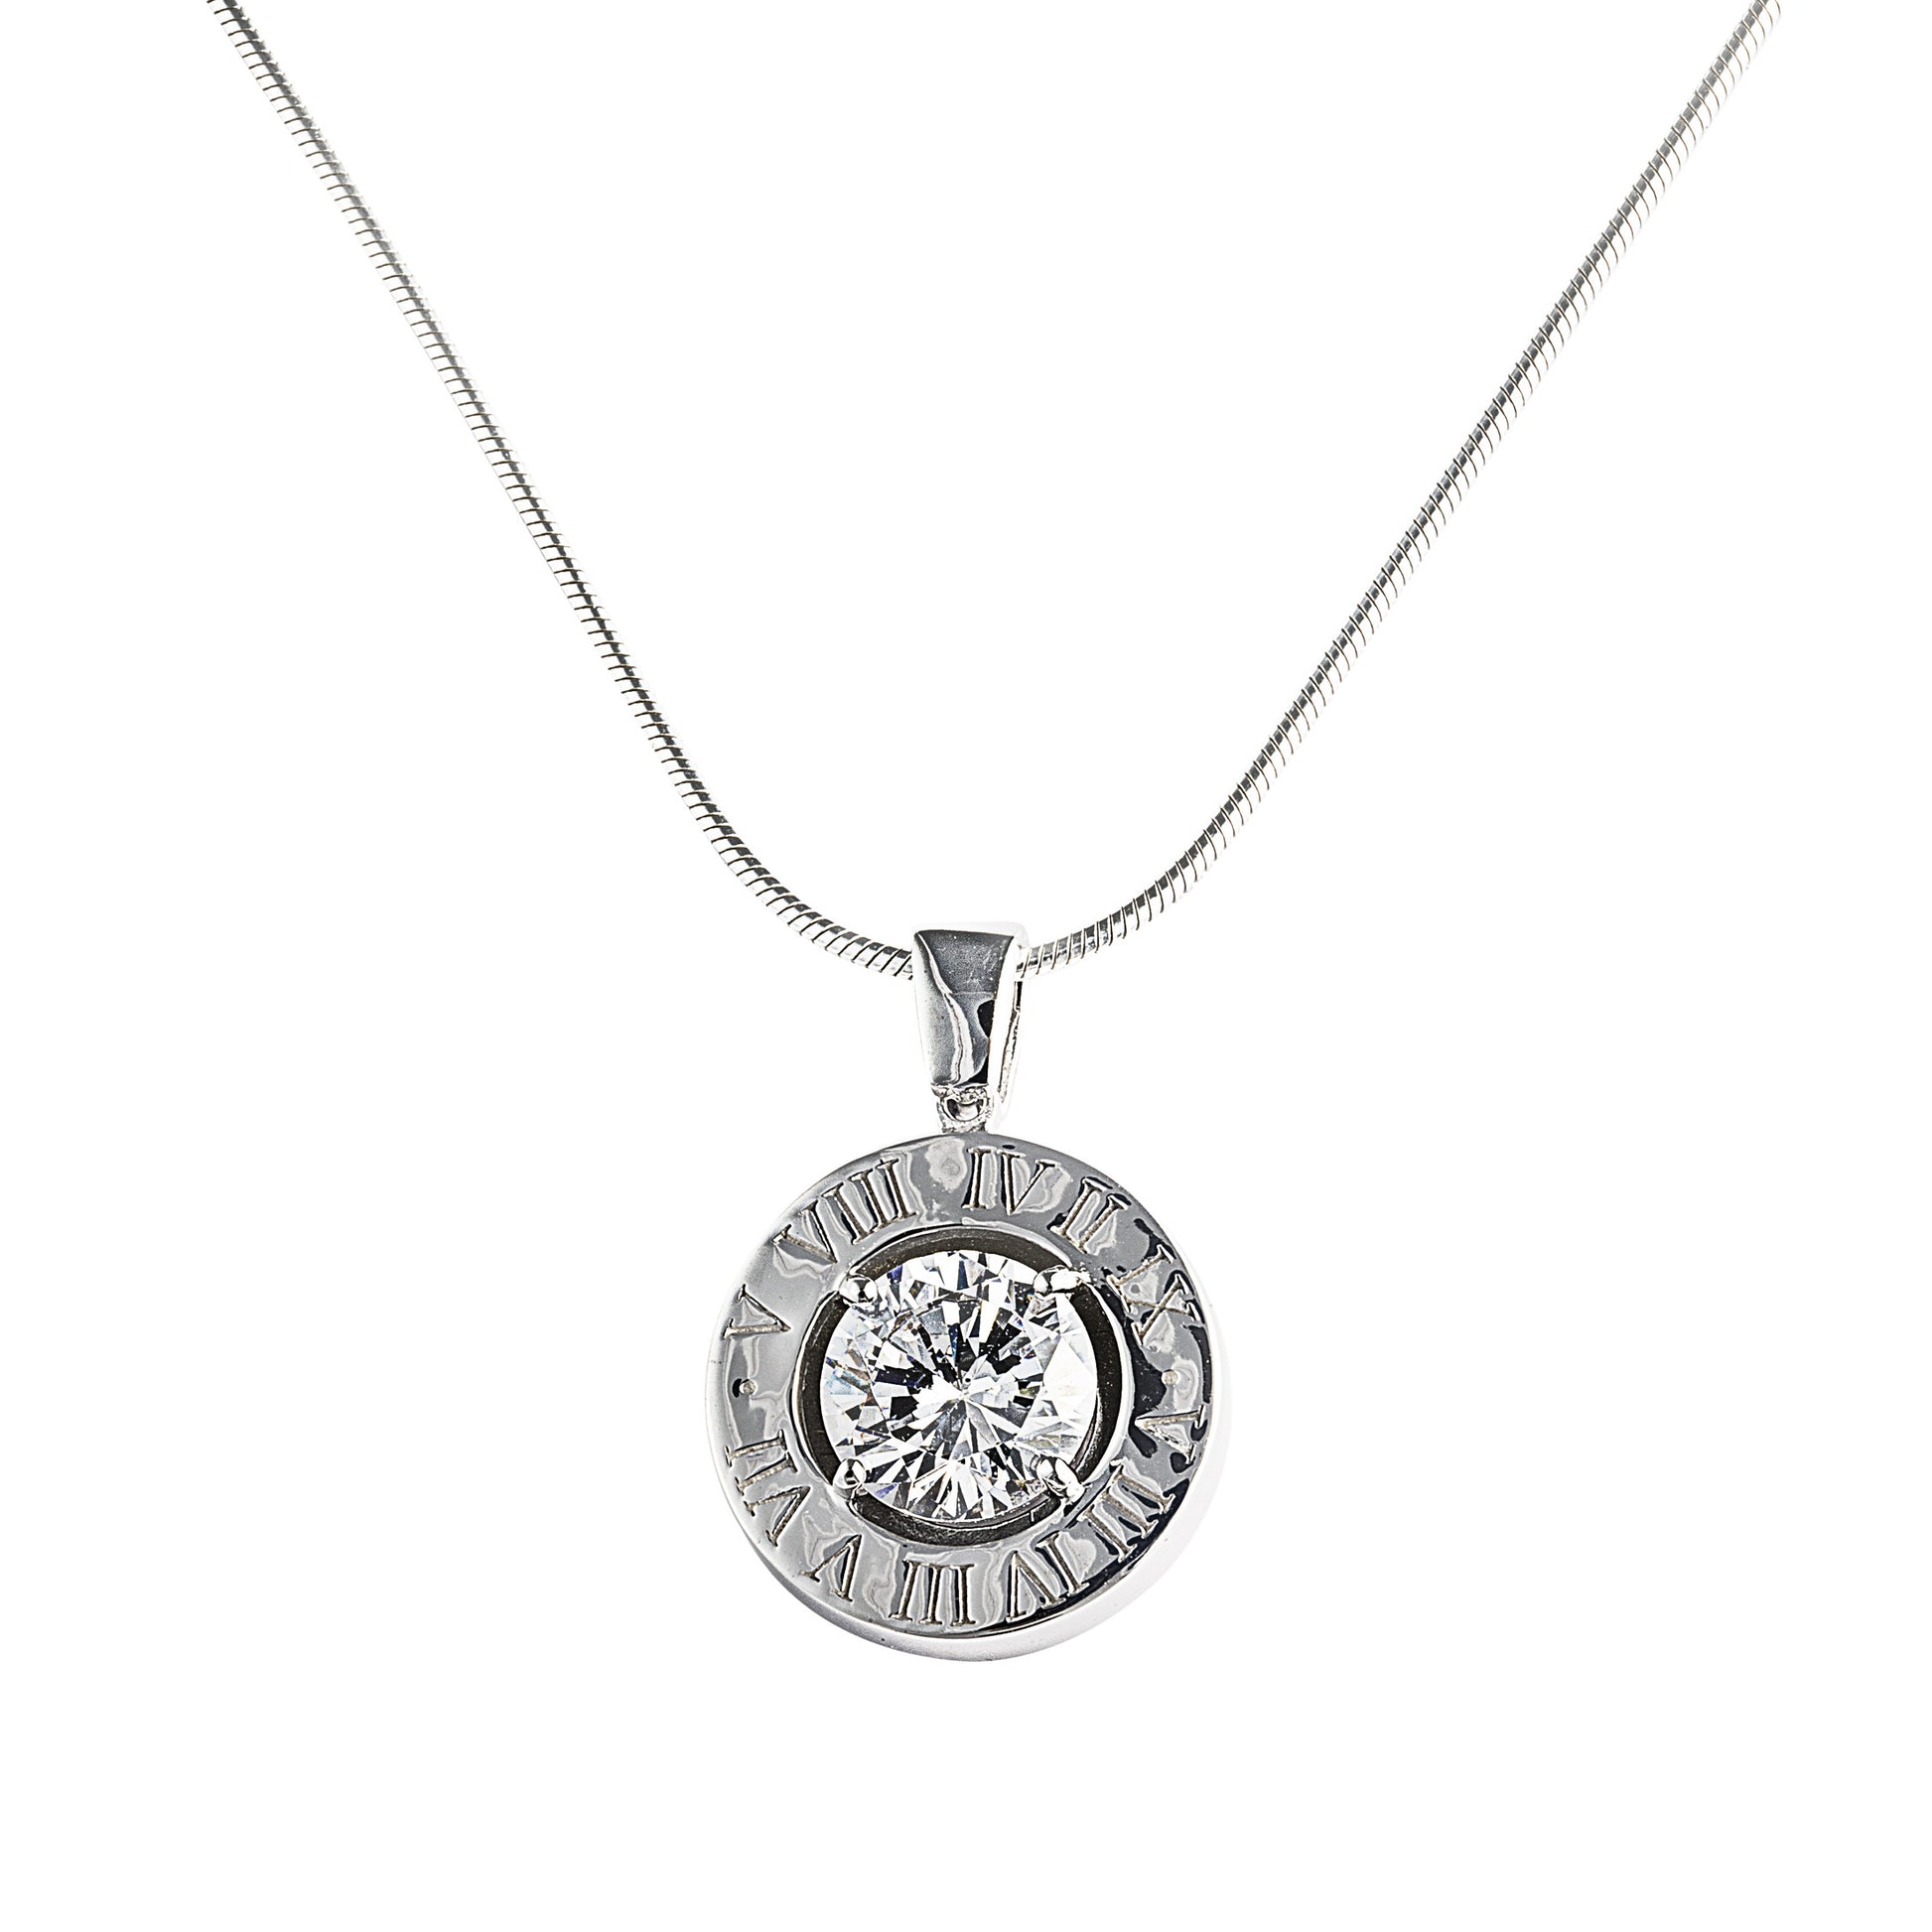 The lovely Eden Stone Necklace in 925 Sterling Silver features a stunning 2-carat cubic zirconia stone surrounded by our signature Roman numerals. Matching rings and earrings are available. Affordable luxury jewellery by Bellagio & Co. Worldwide shipping plus FREE shipping for orders over $150 in Australia.